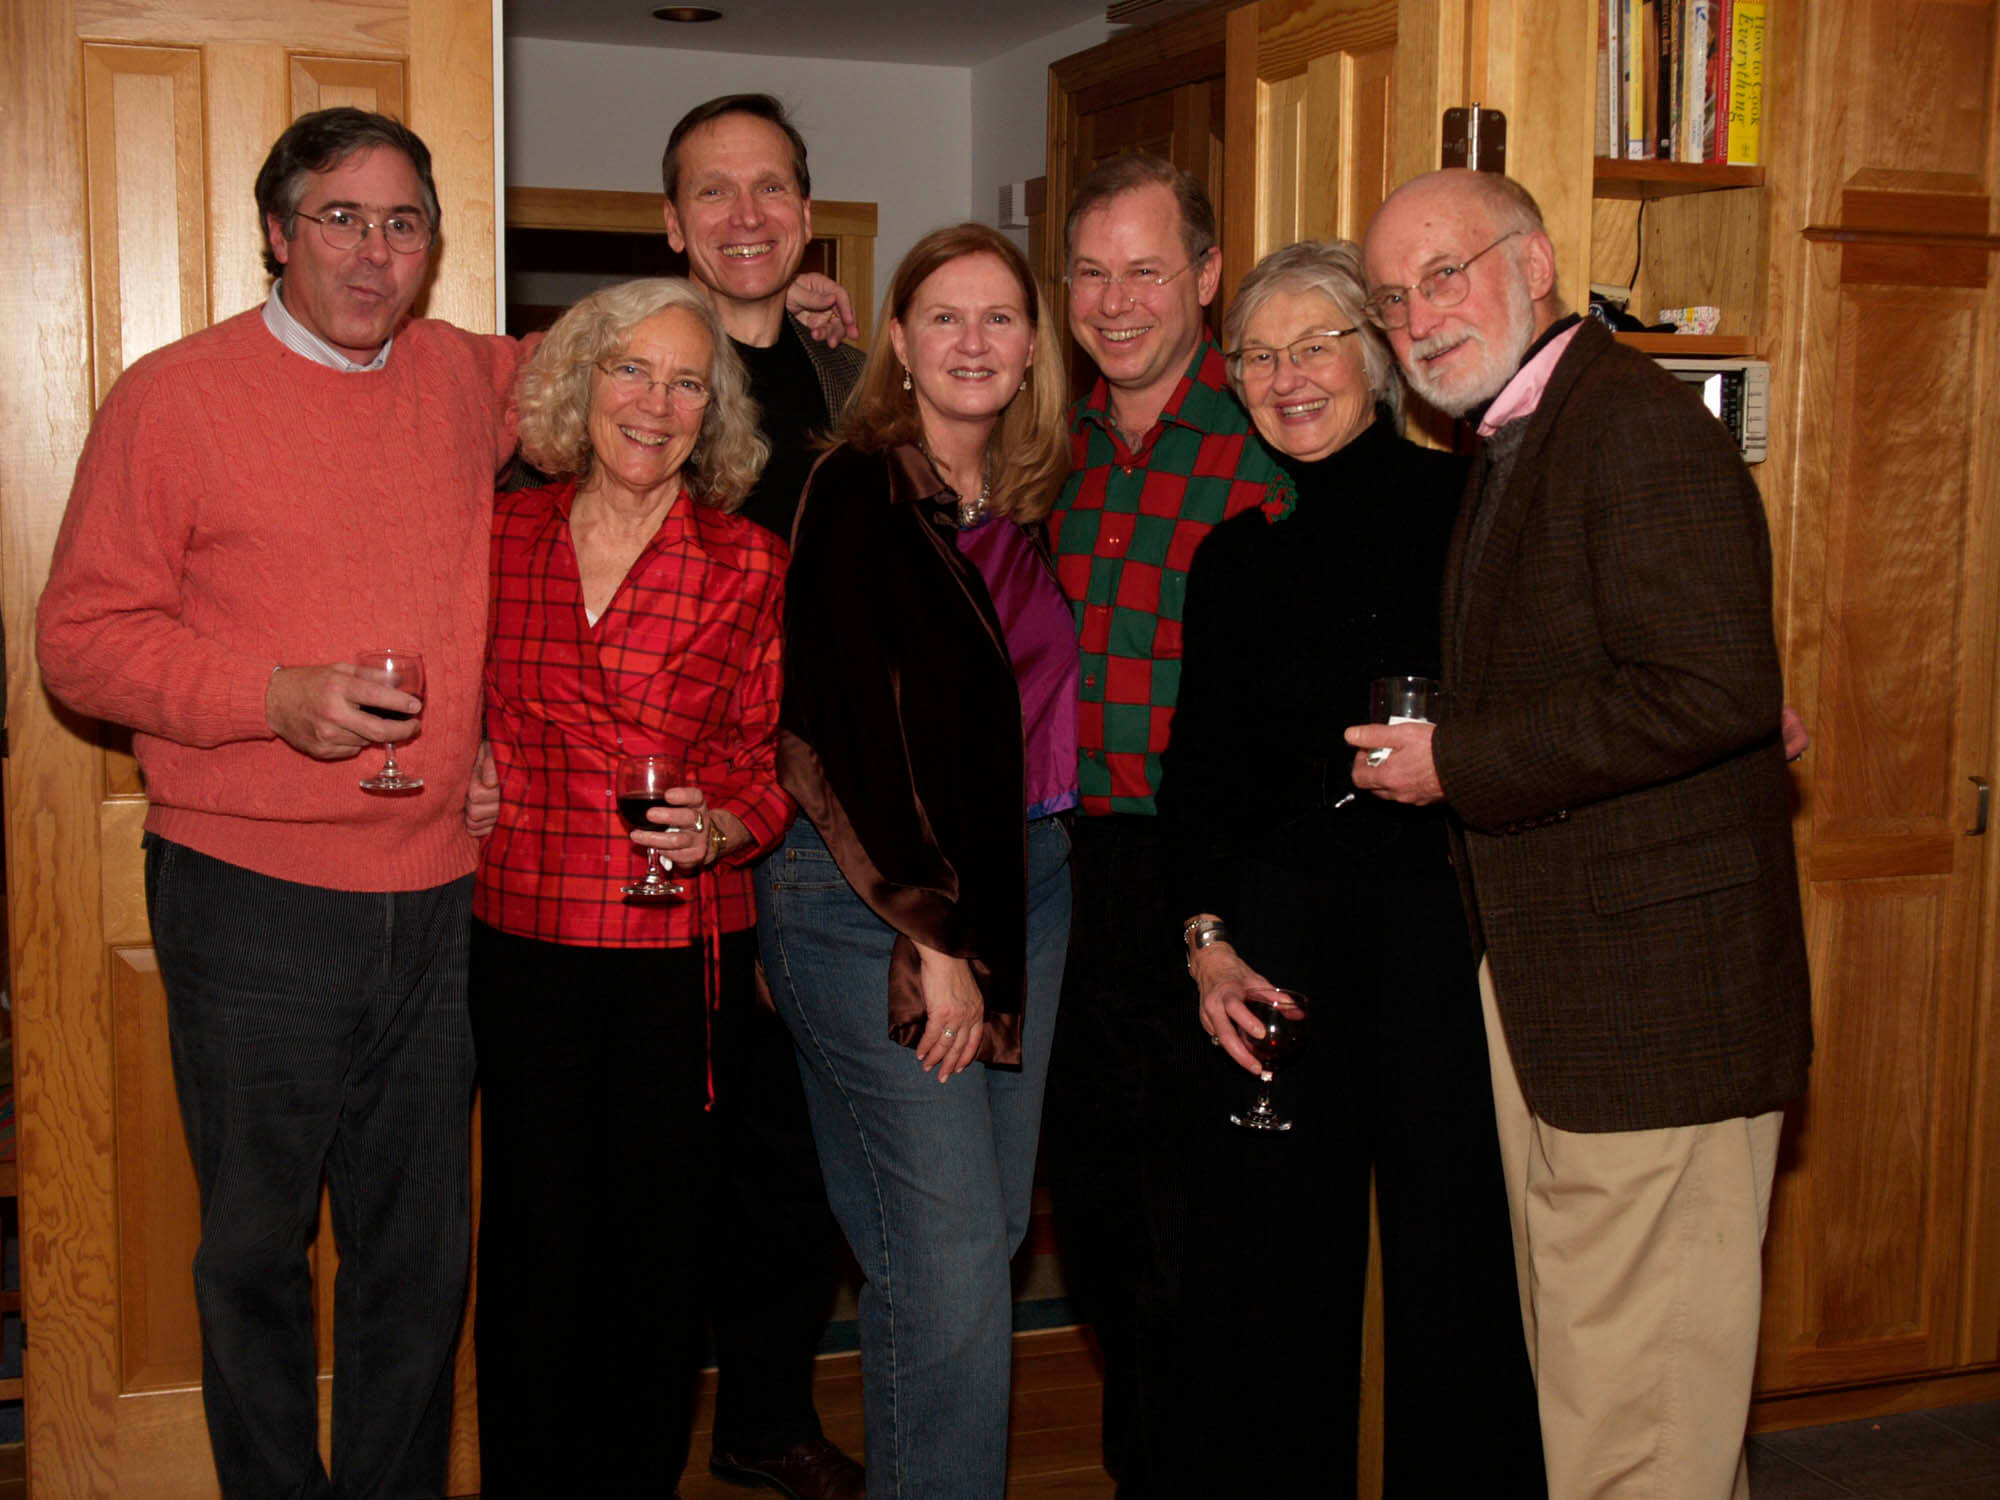 From left to right: Peter Ralston, Joan Welsh, John Claussen, Joyce Tenneson, Charles Altschul, Barbara Goodbidy, and David Lyman.